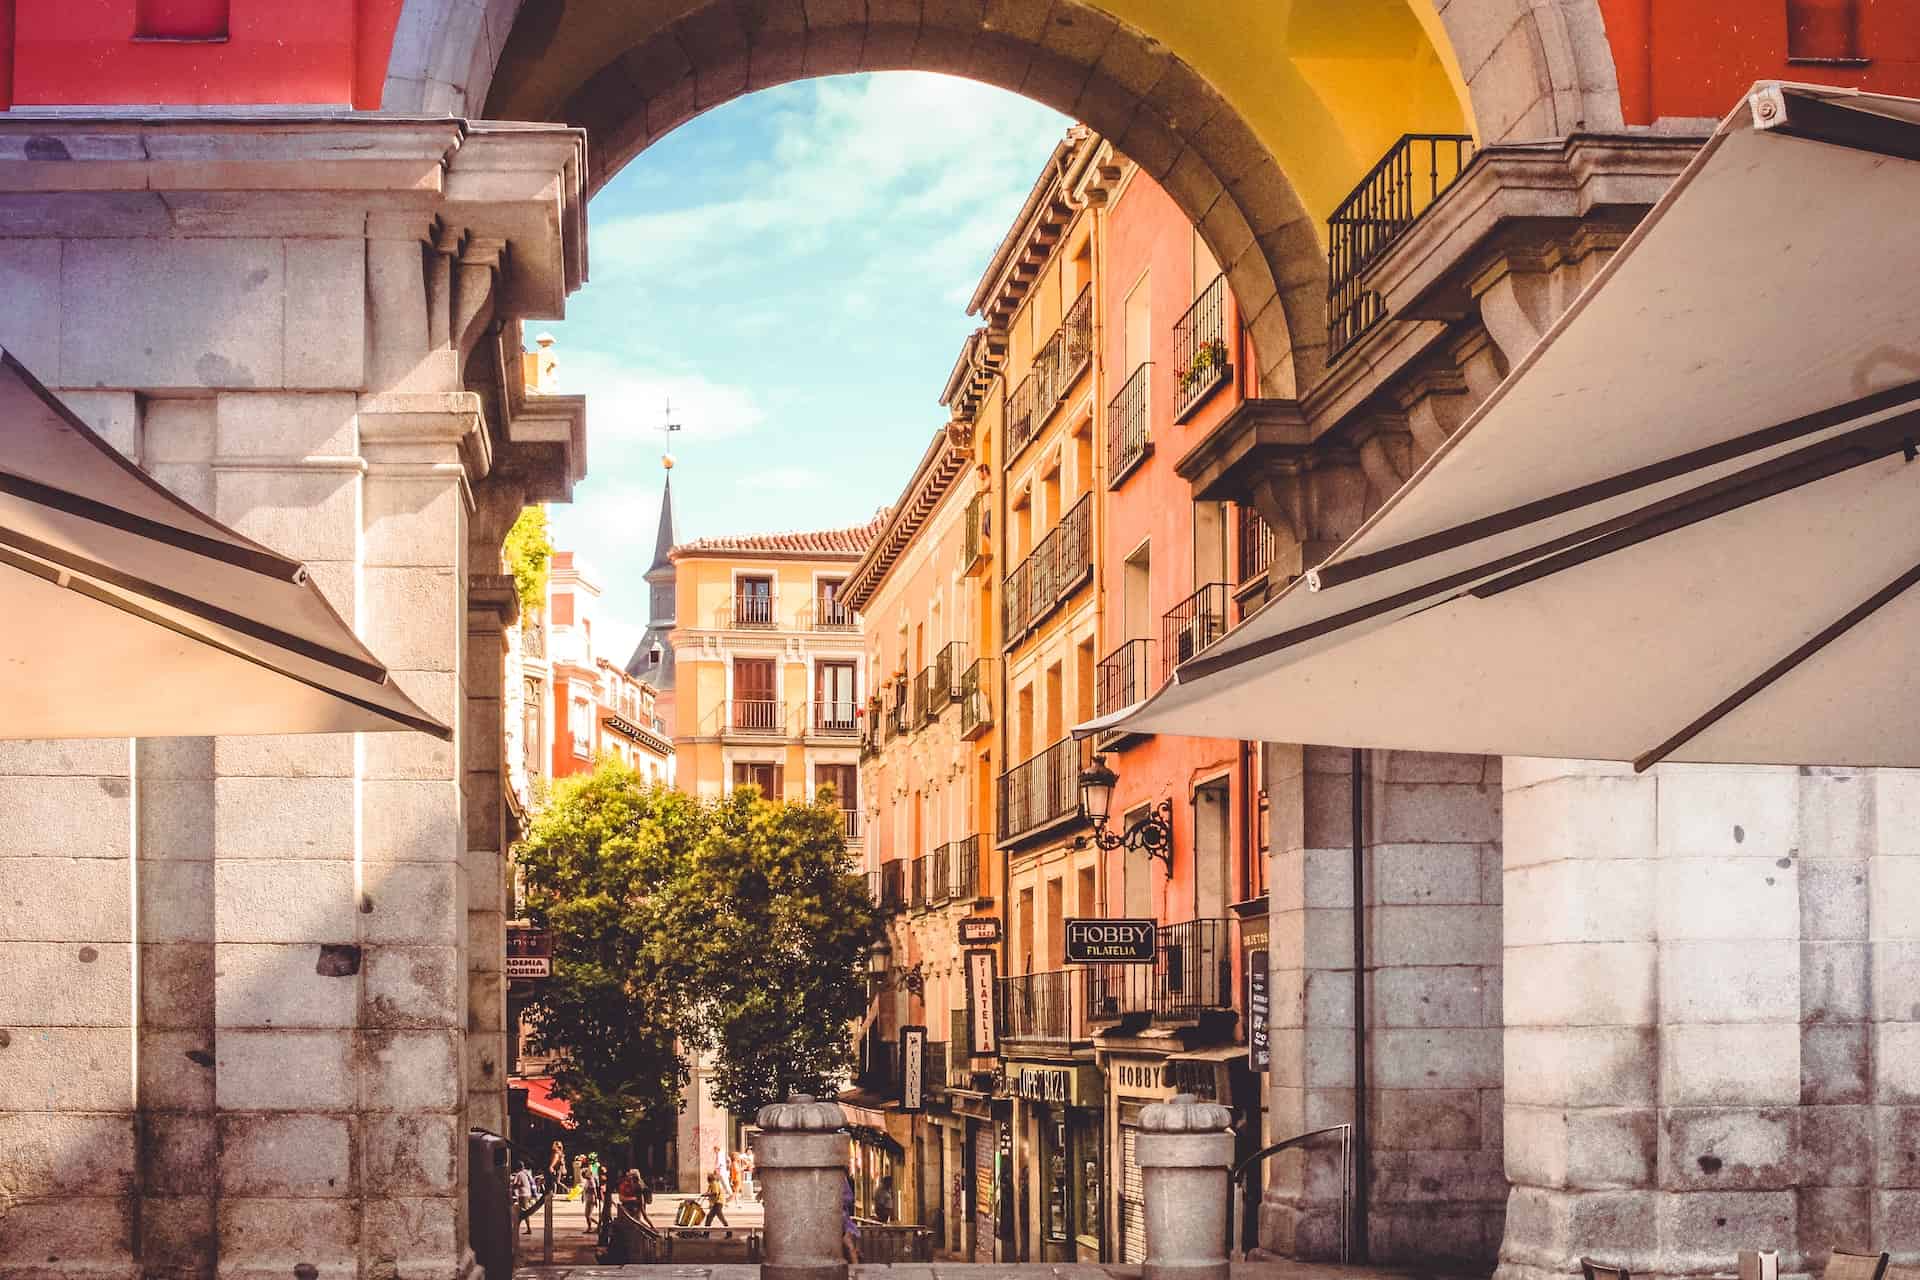 Archway leading to a street in a city in Spain.